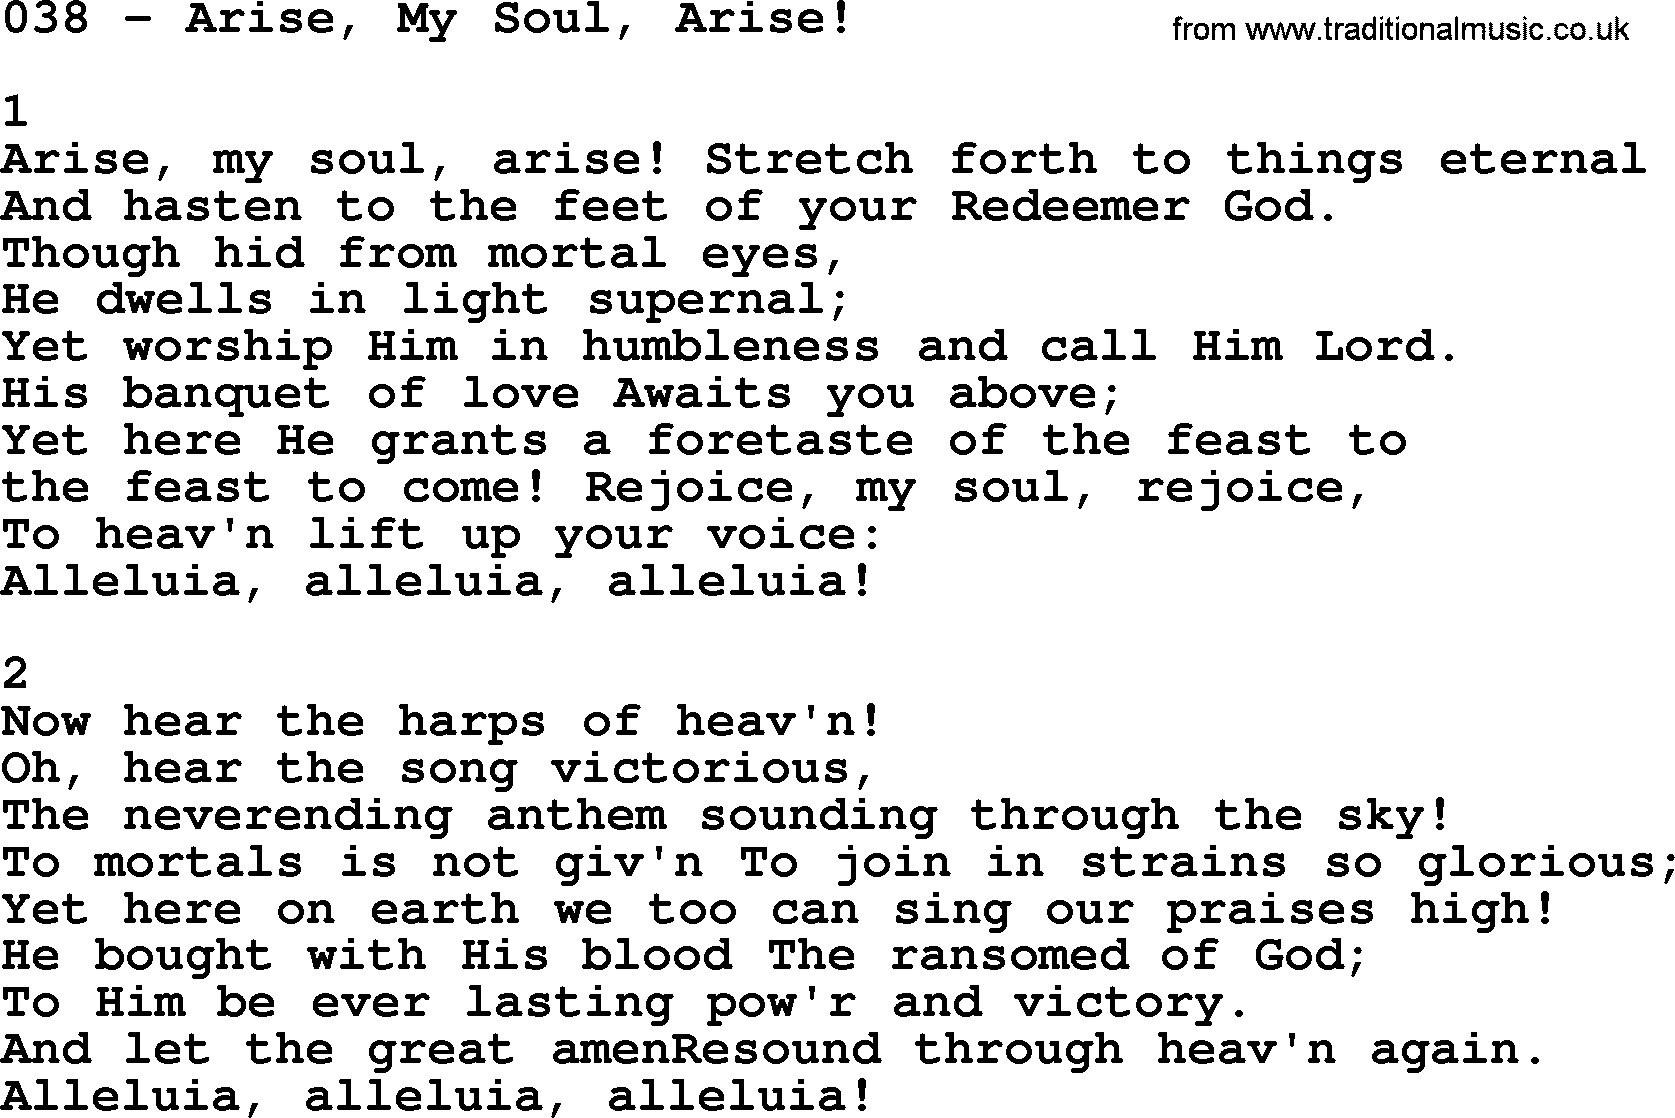 Complete Adventis Hymnal, title: 038-Arise, My Soul, Arise!, with lyrics, midi, mp3, powerpoints(PPT) and PDF,